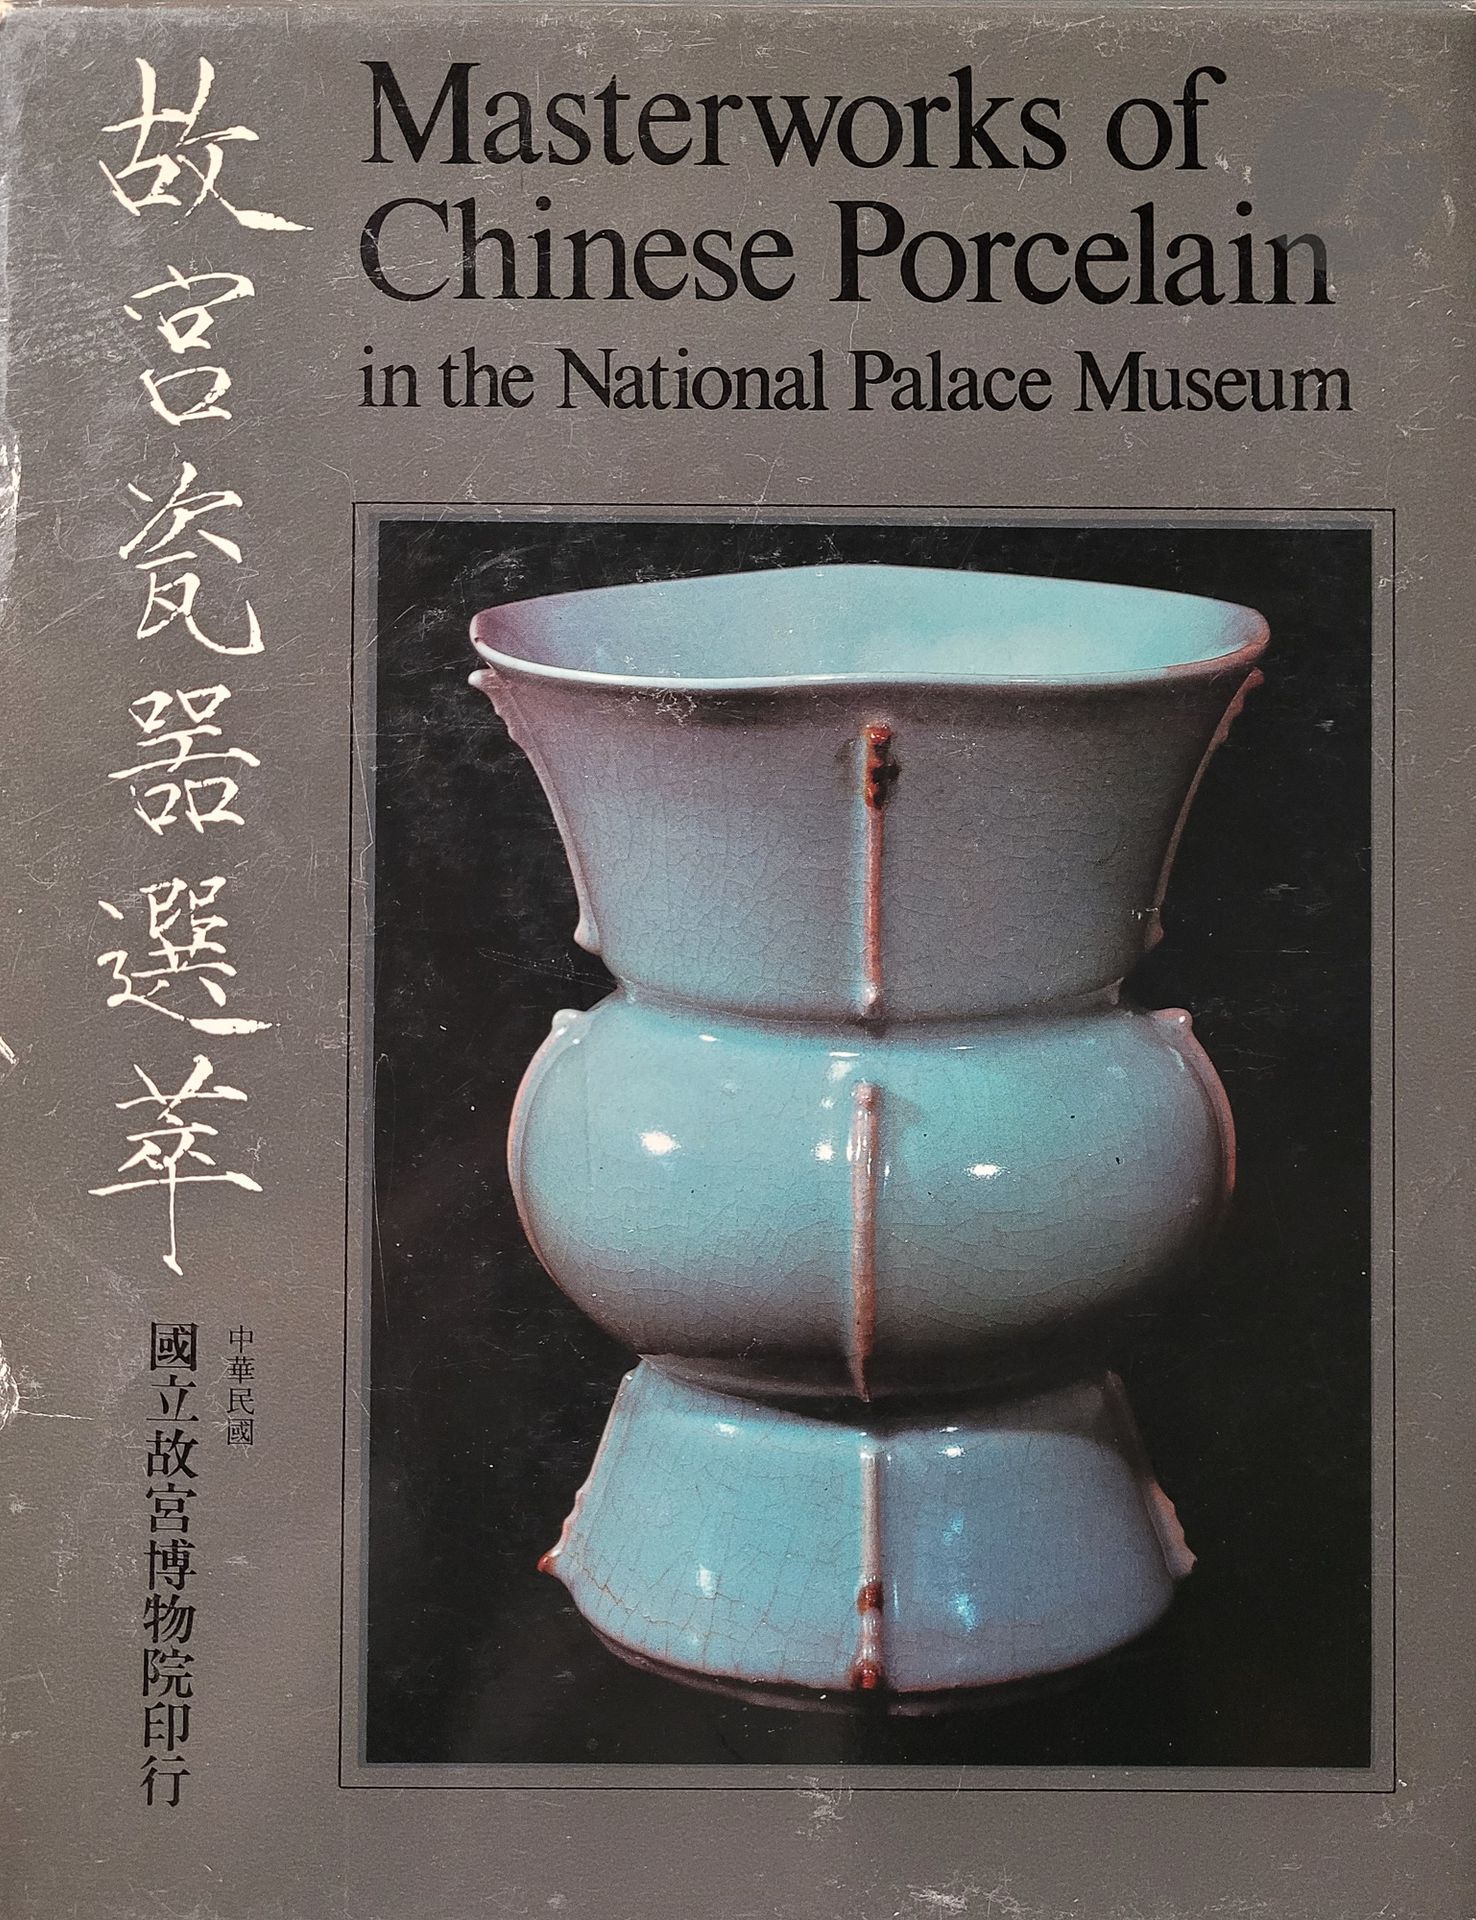 Null [CHINE - PORCELAINE] 
Cinq ouvrages :
- Seventeenth century Chinese porcela&hellip;